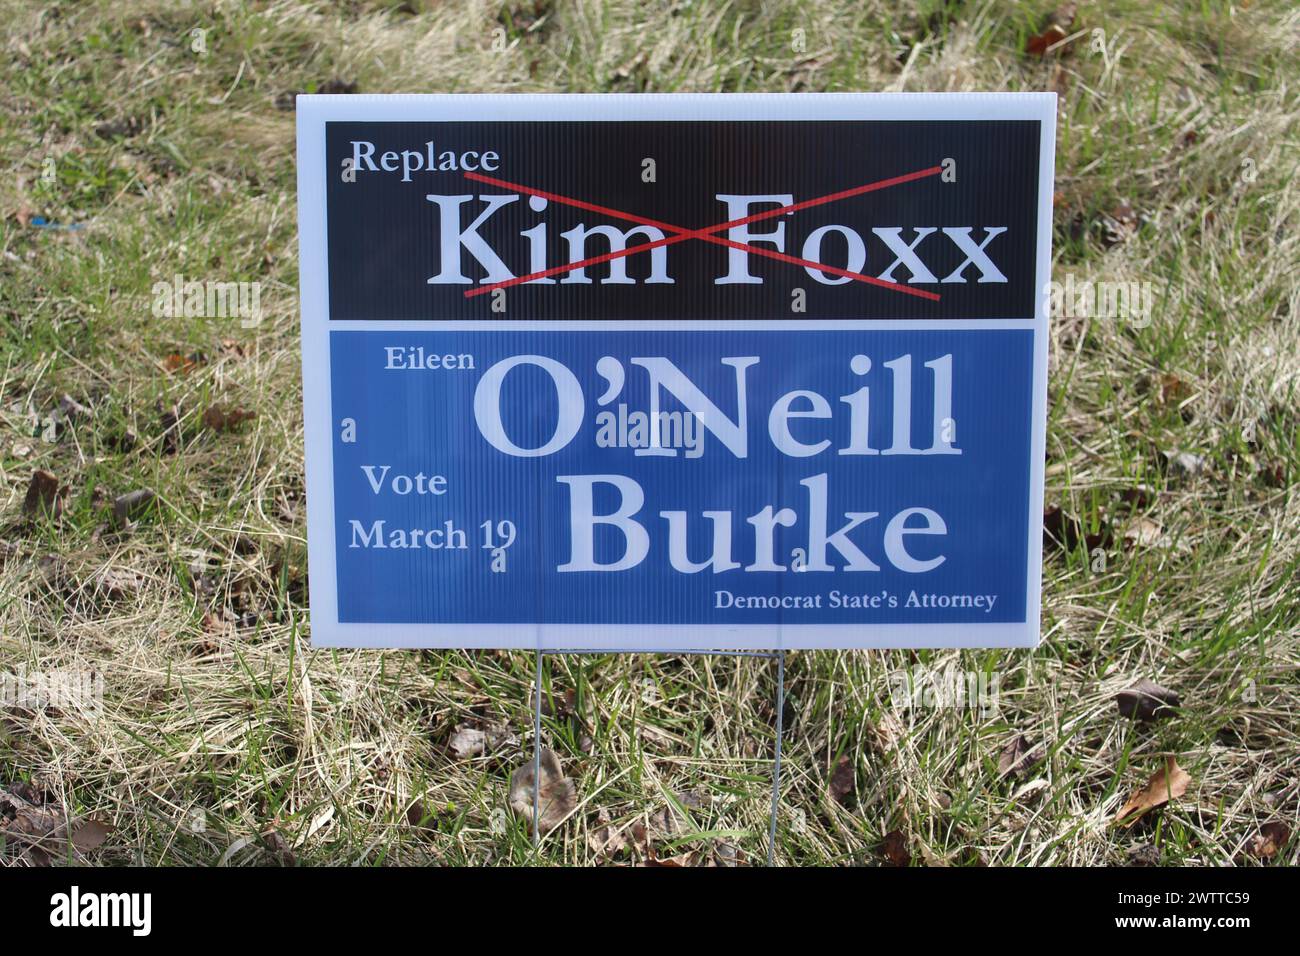 Replace Kim Foxx and Eileen O'Neill Burke Cook County states's attorney sign Stock Photo